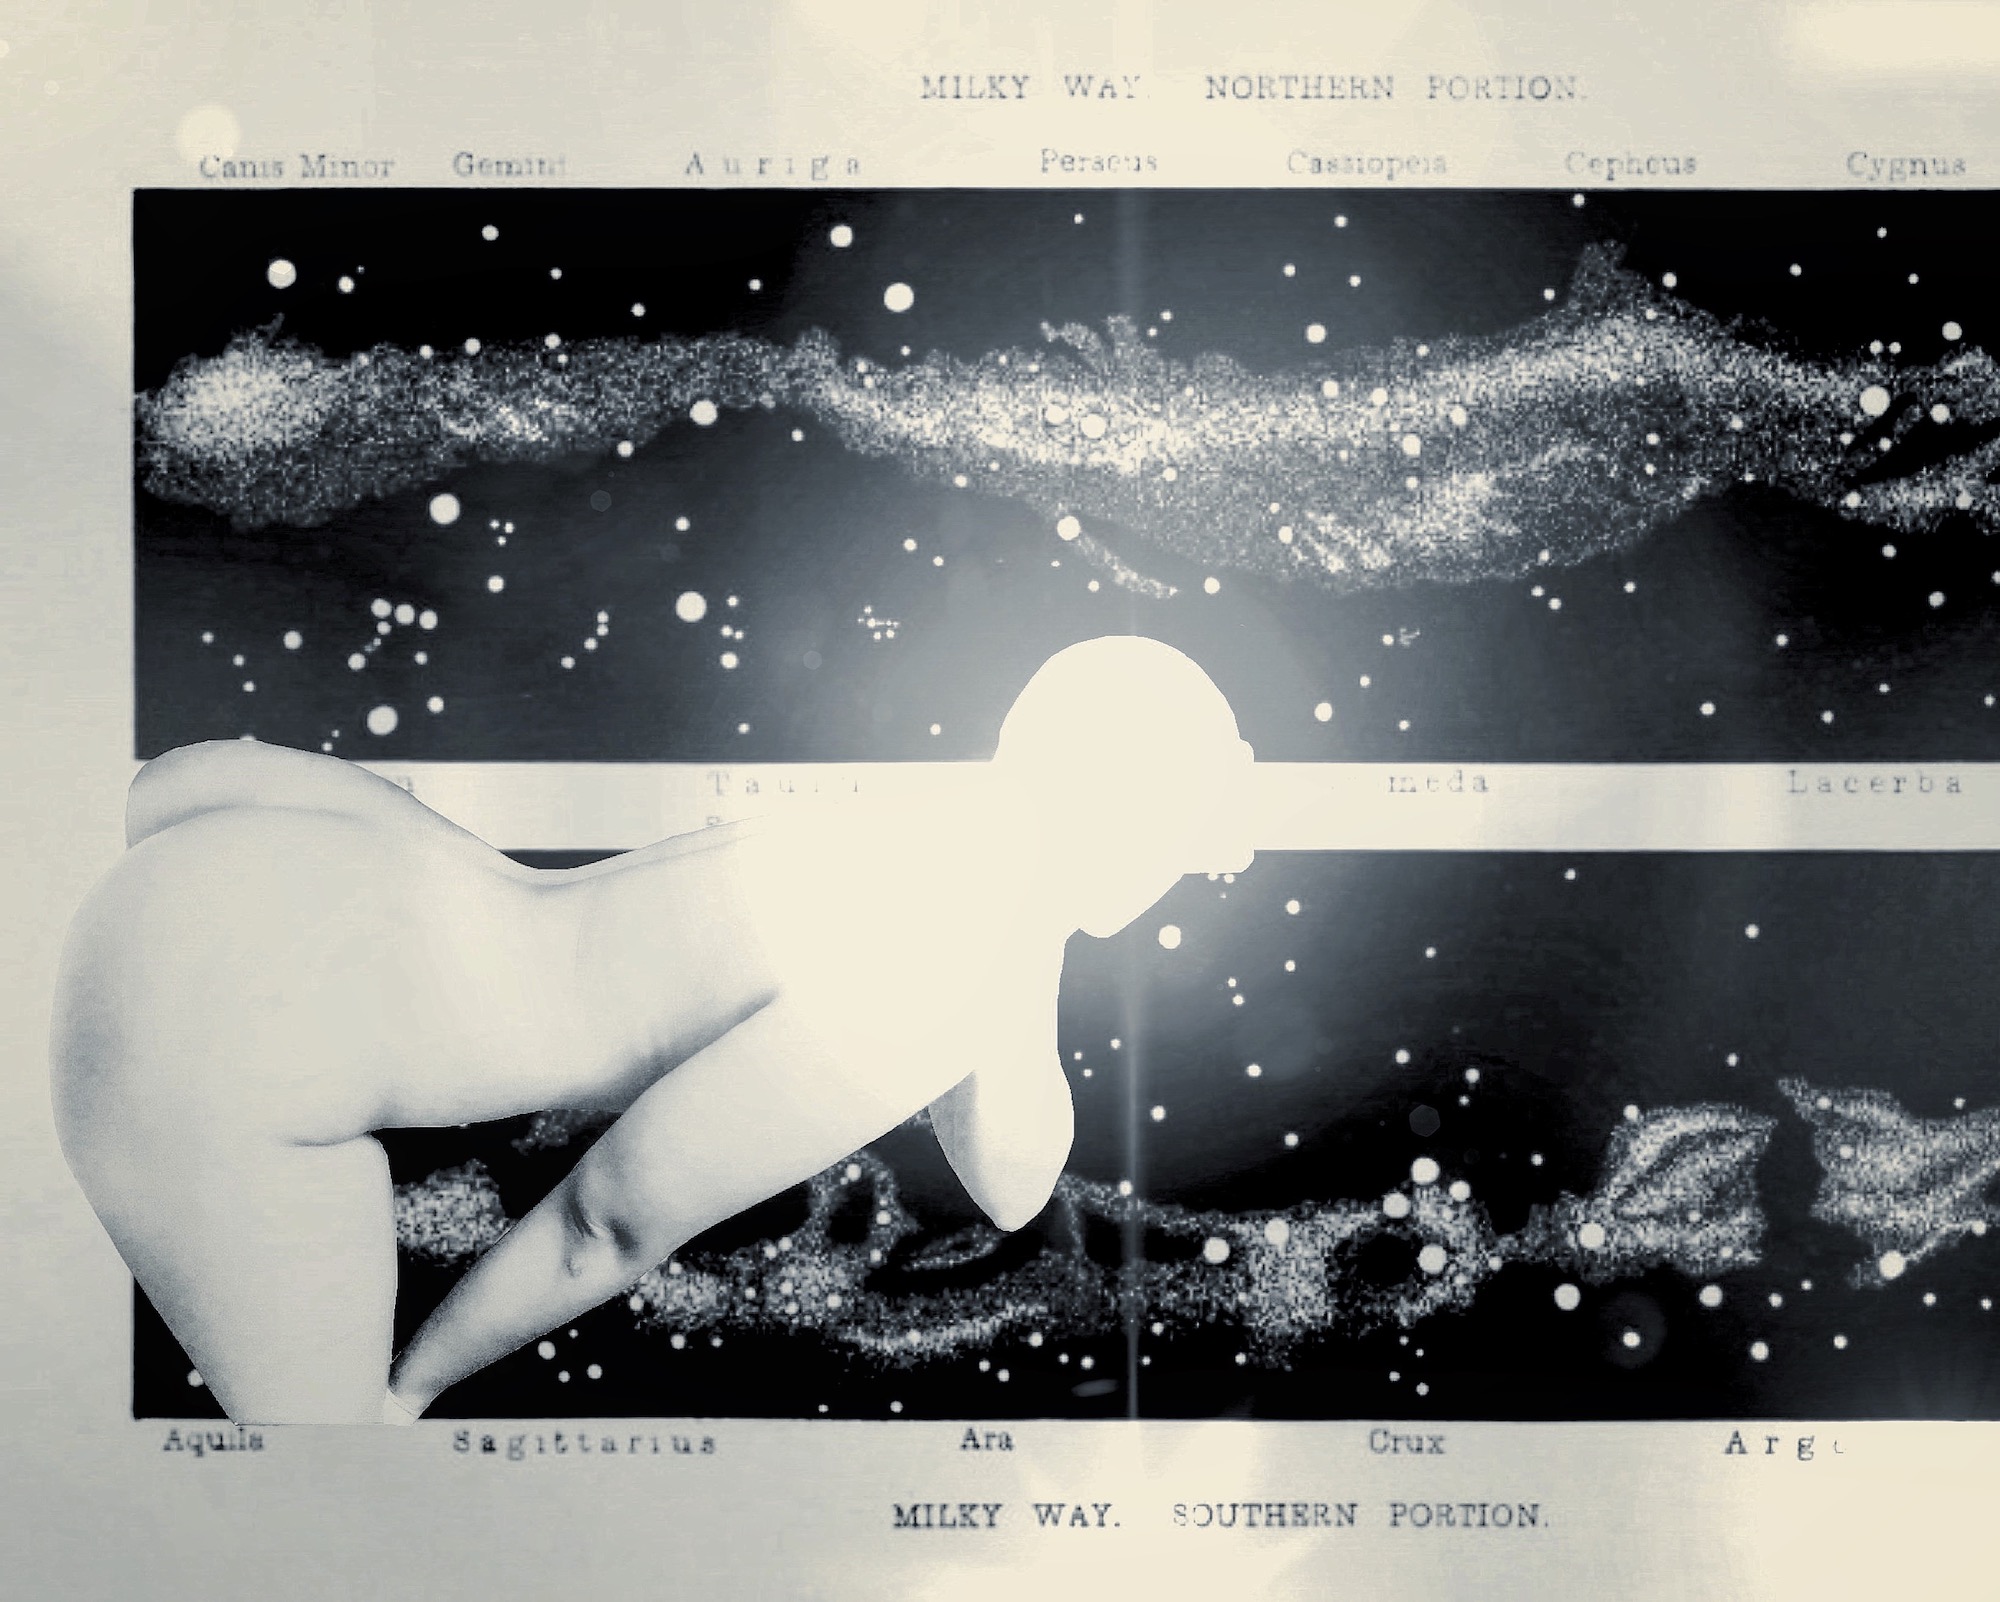 The shape of a woman's body is in the foreground; constellations in black and white is in the background. Image is a photograph.